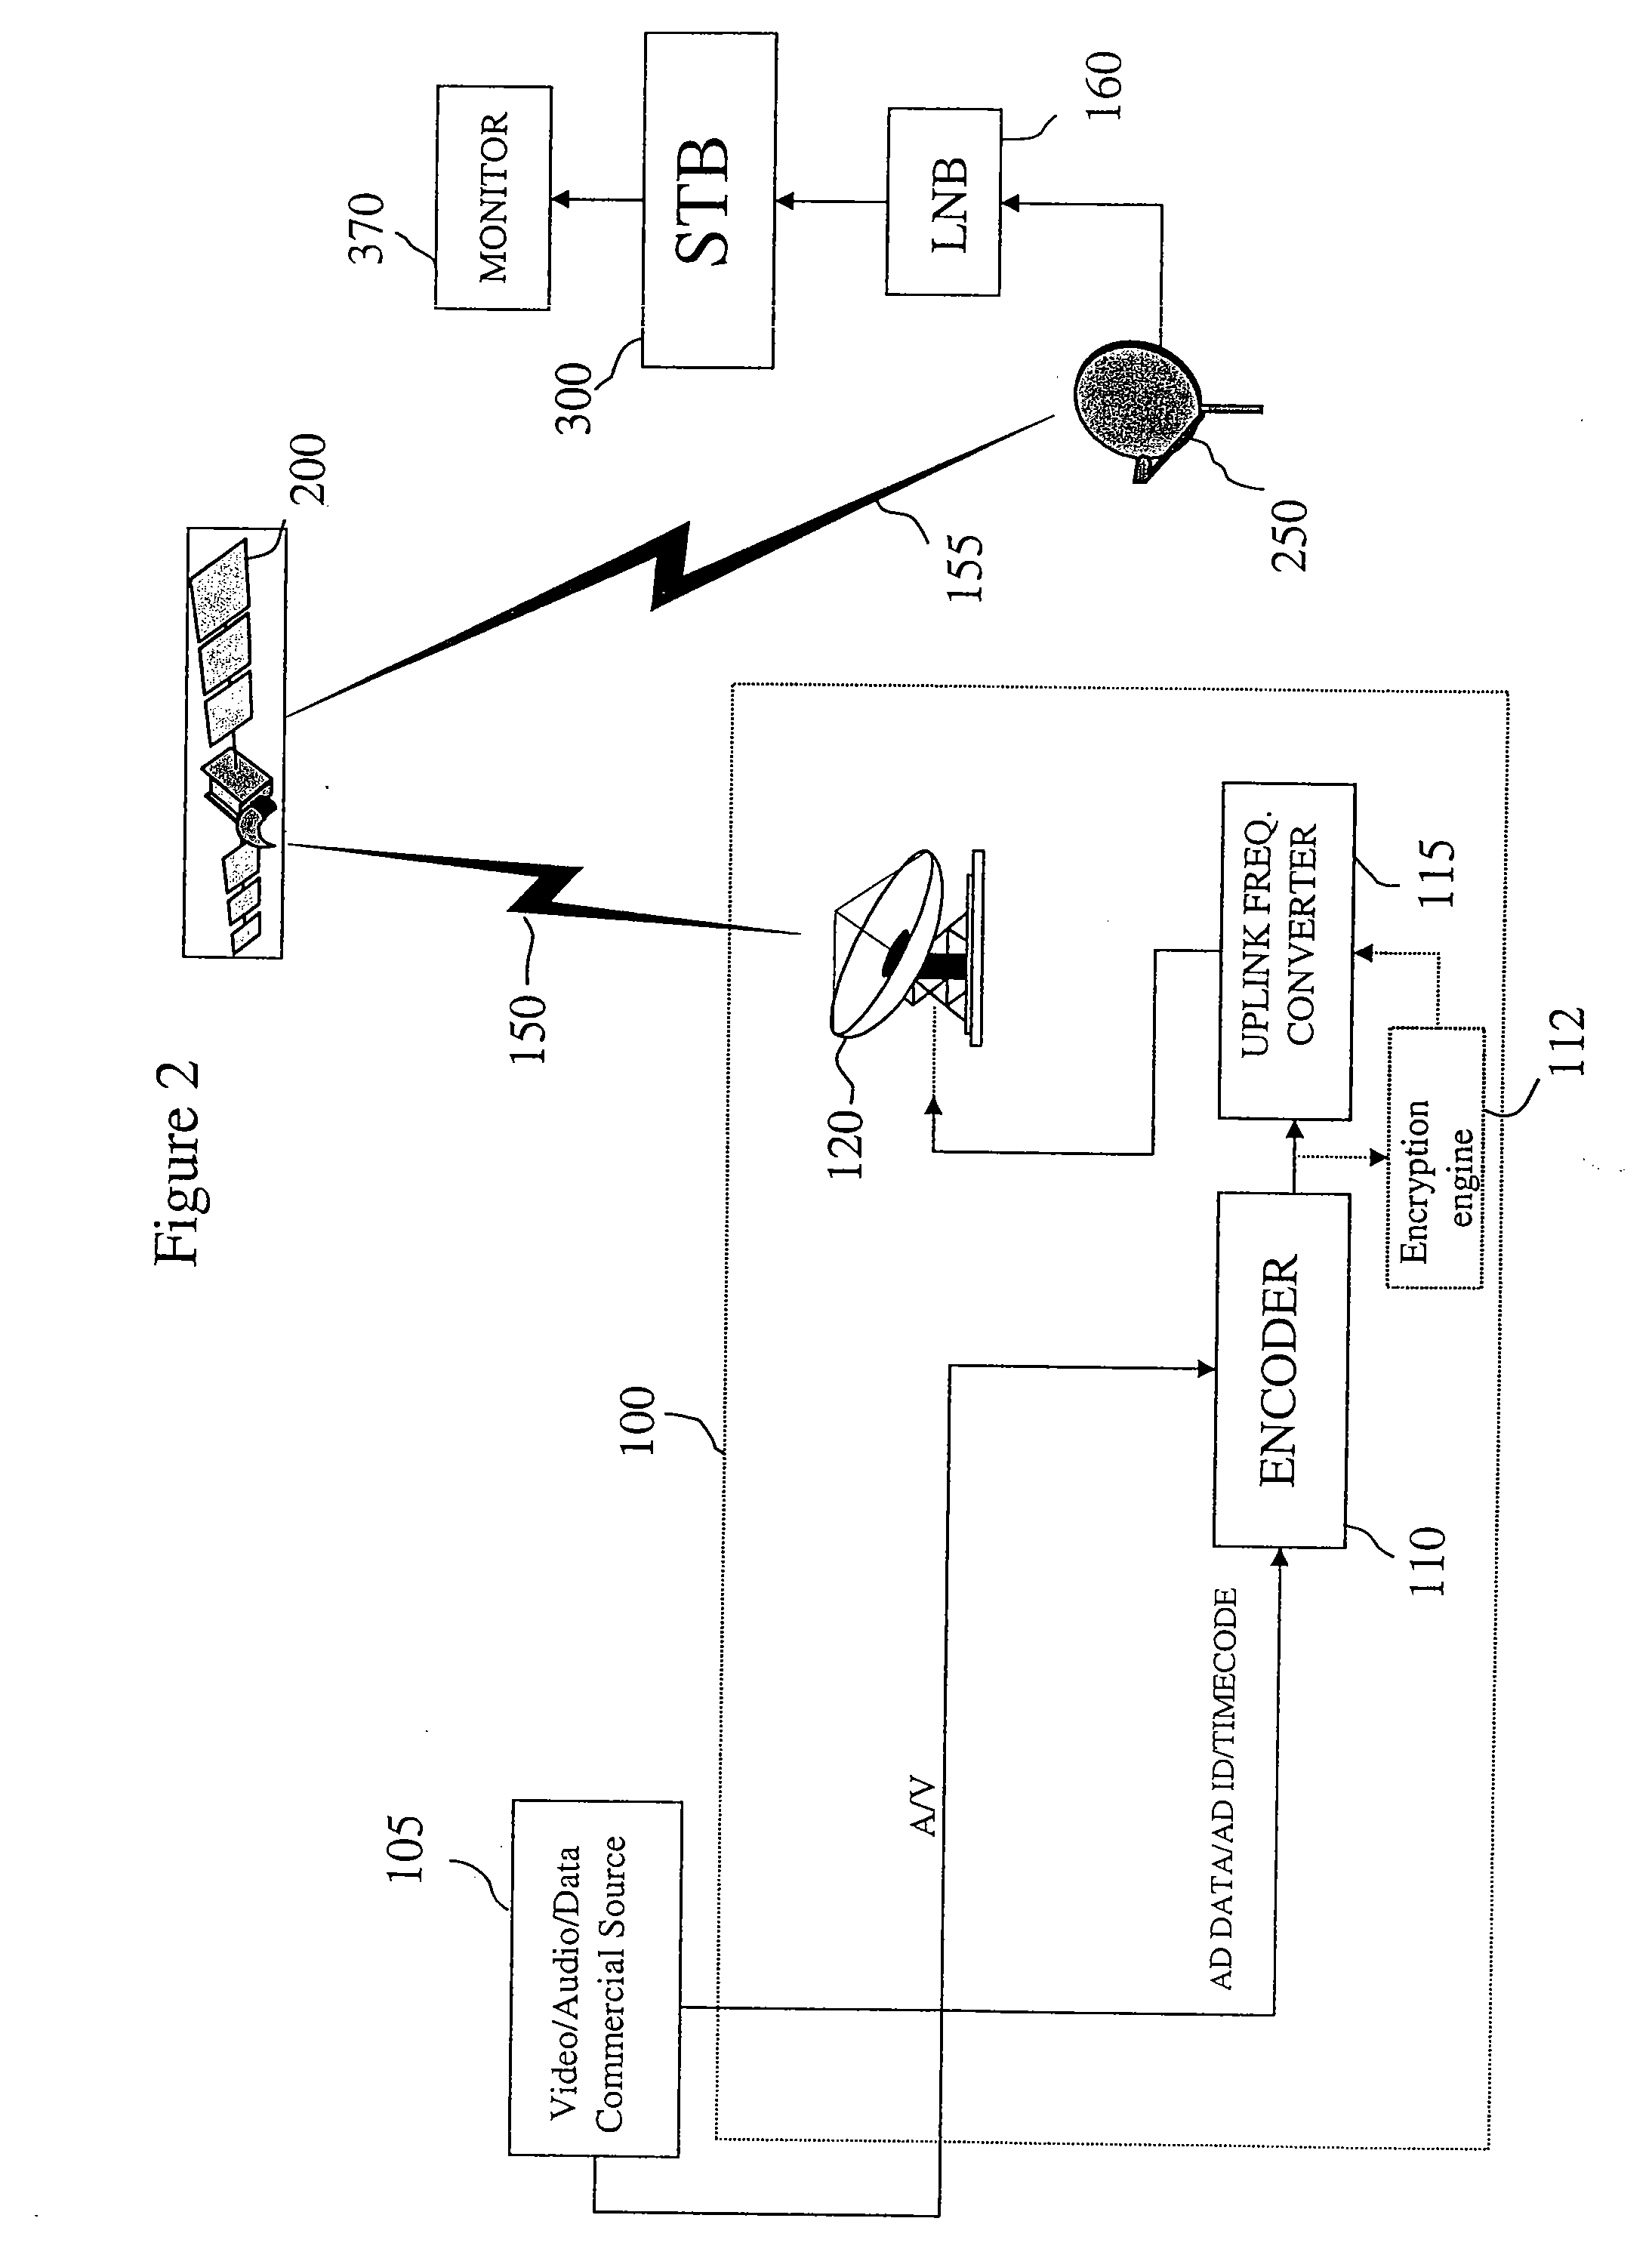 Method and system for electronic program guide temporal content organization